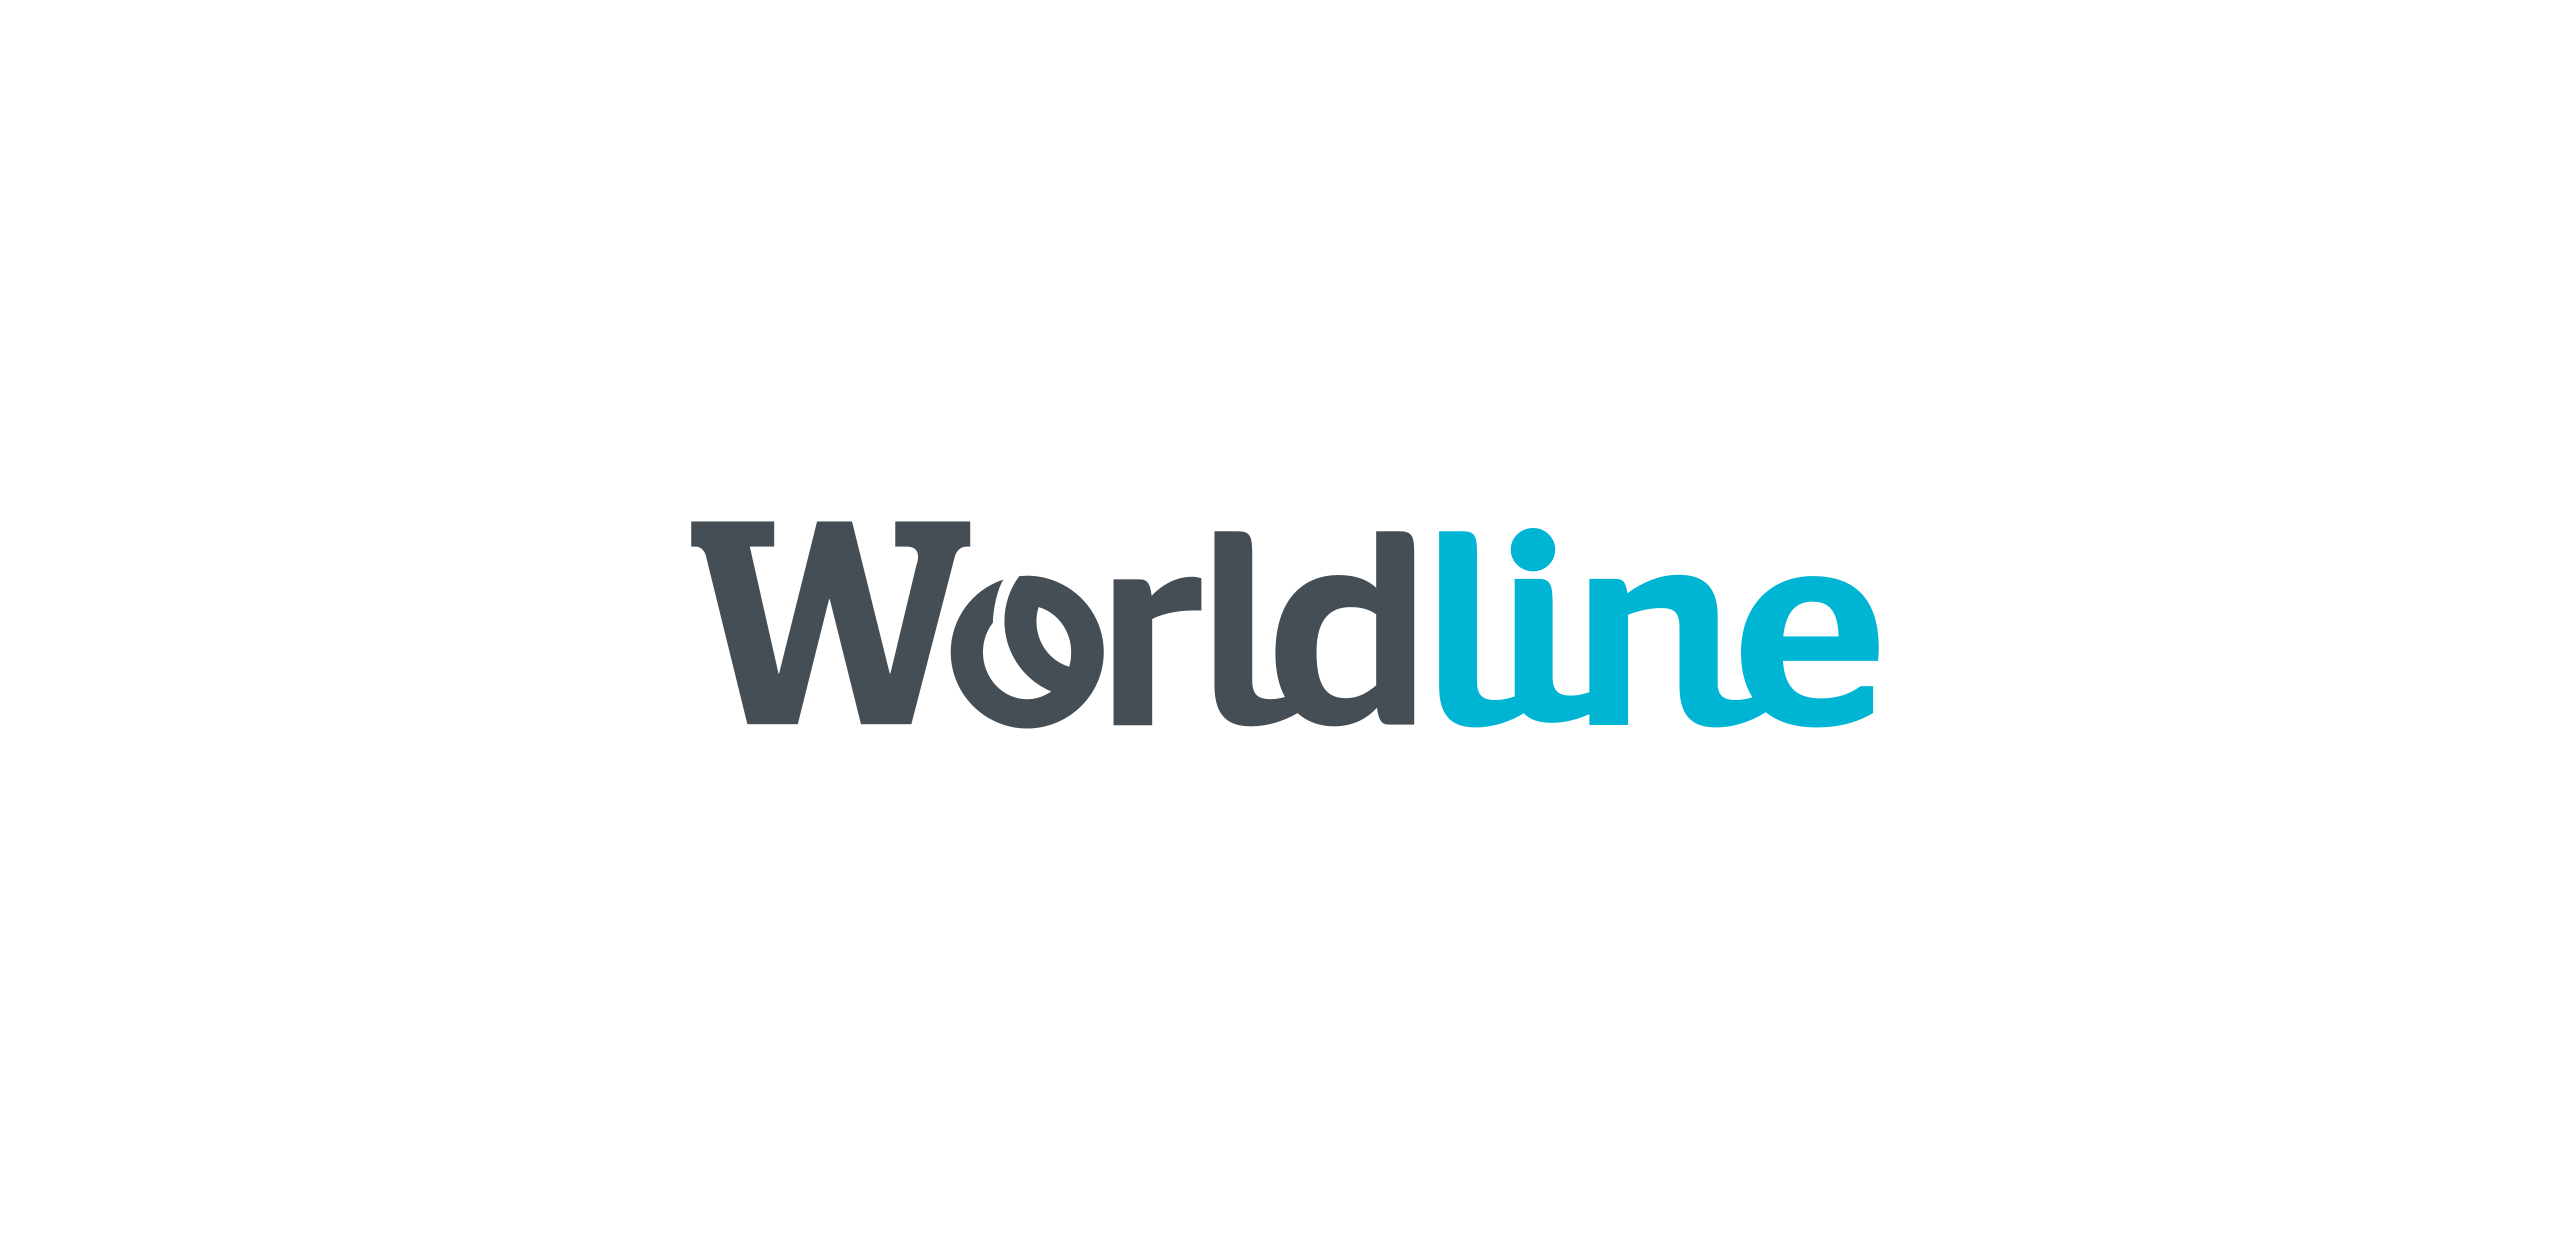 Worldline Joins Forces with French Fintech Venture A3BC Regarding Secure and Touchless Authentication